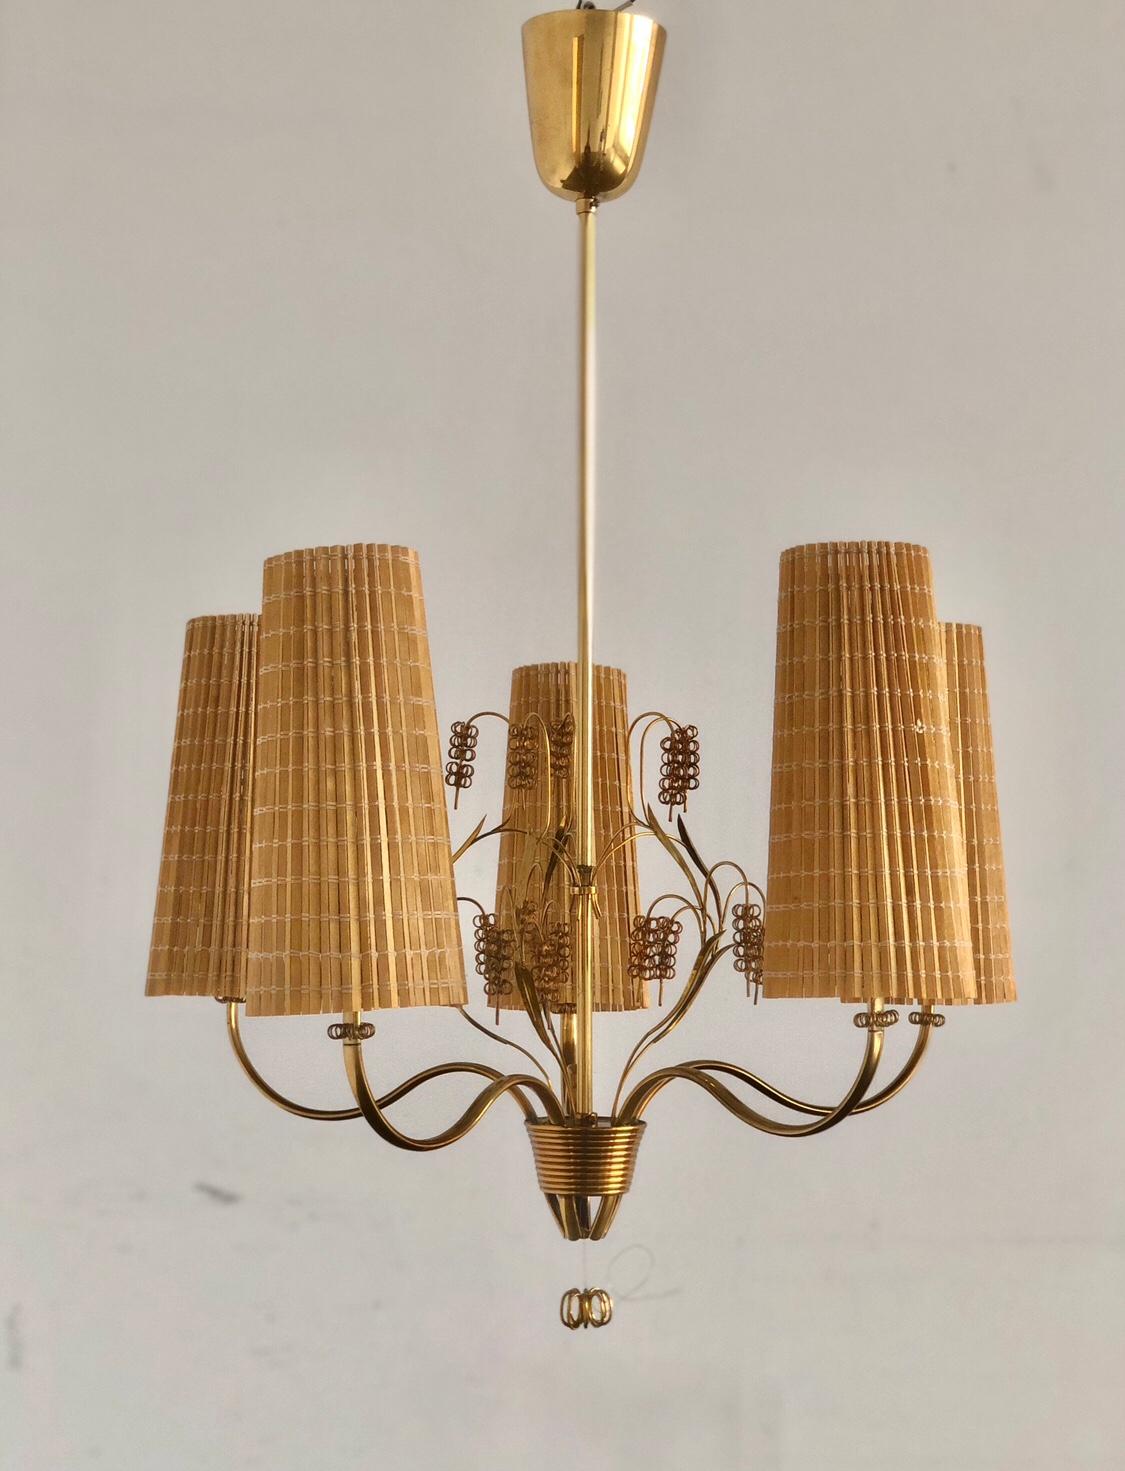 A Chandelier designed by Paavo Tynell for Taito Oy, Model 9015. Finland , circa 1940th.
Marked ” OY TAITO AB 9015 ”.  Measures : Diameter 23? ; Height 33?.
Two fixtures available. Rewiring available upon request.
Price is for each fixture.